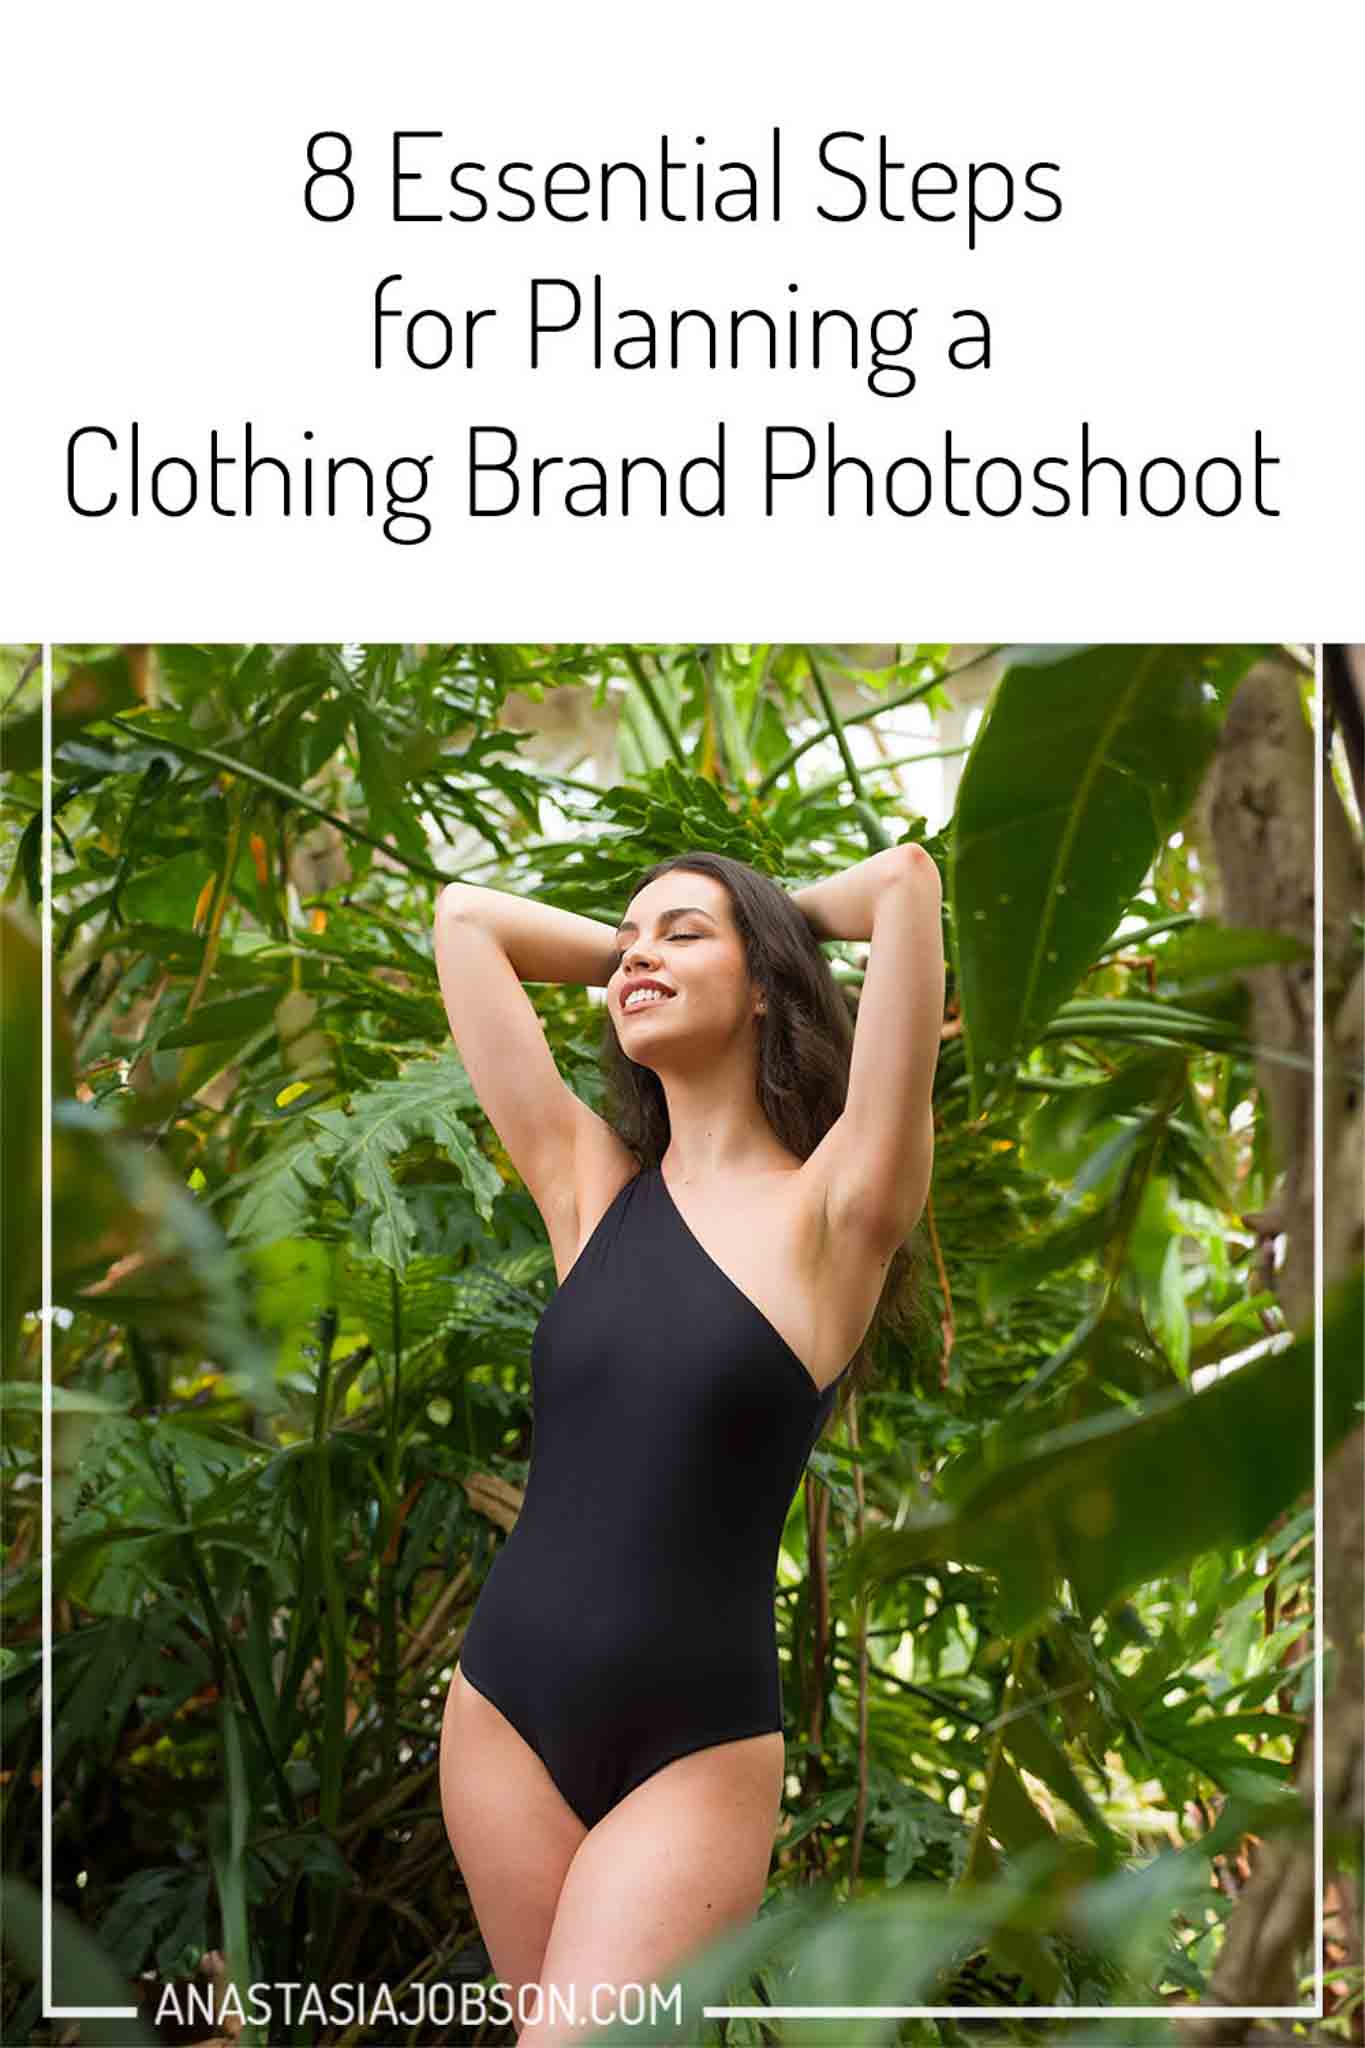 How to plan a clothing brand photoshoot - photography blog